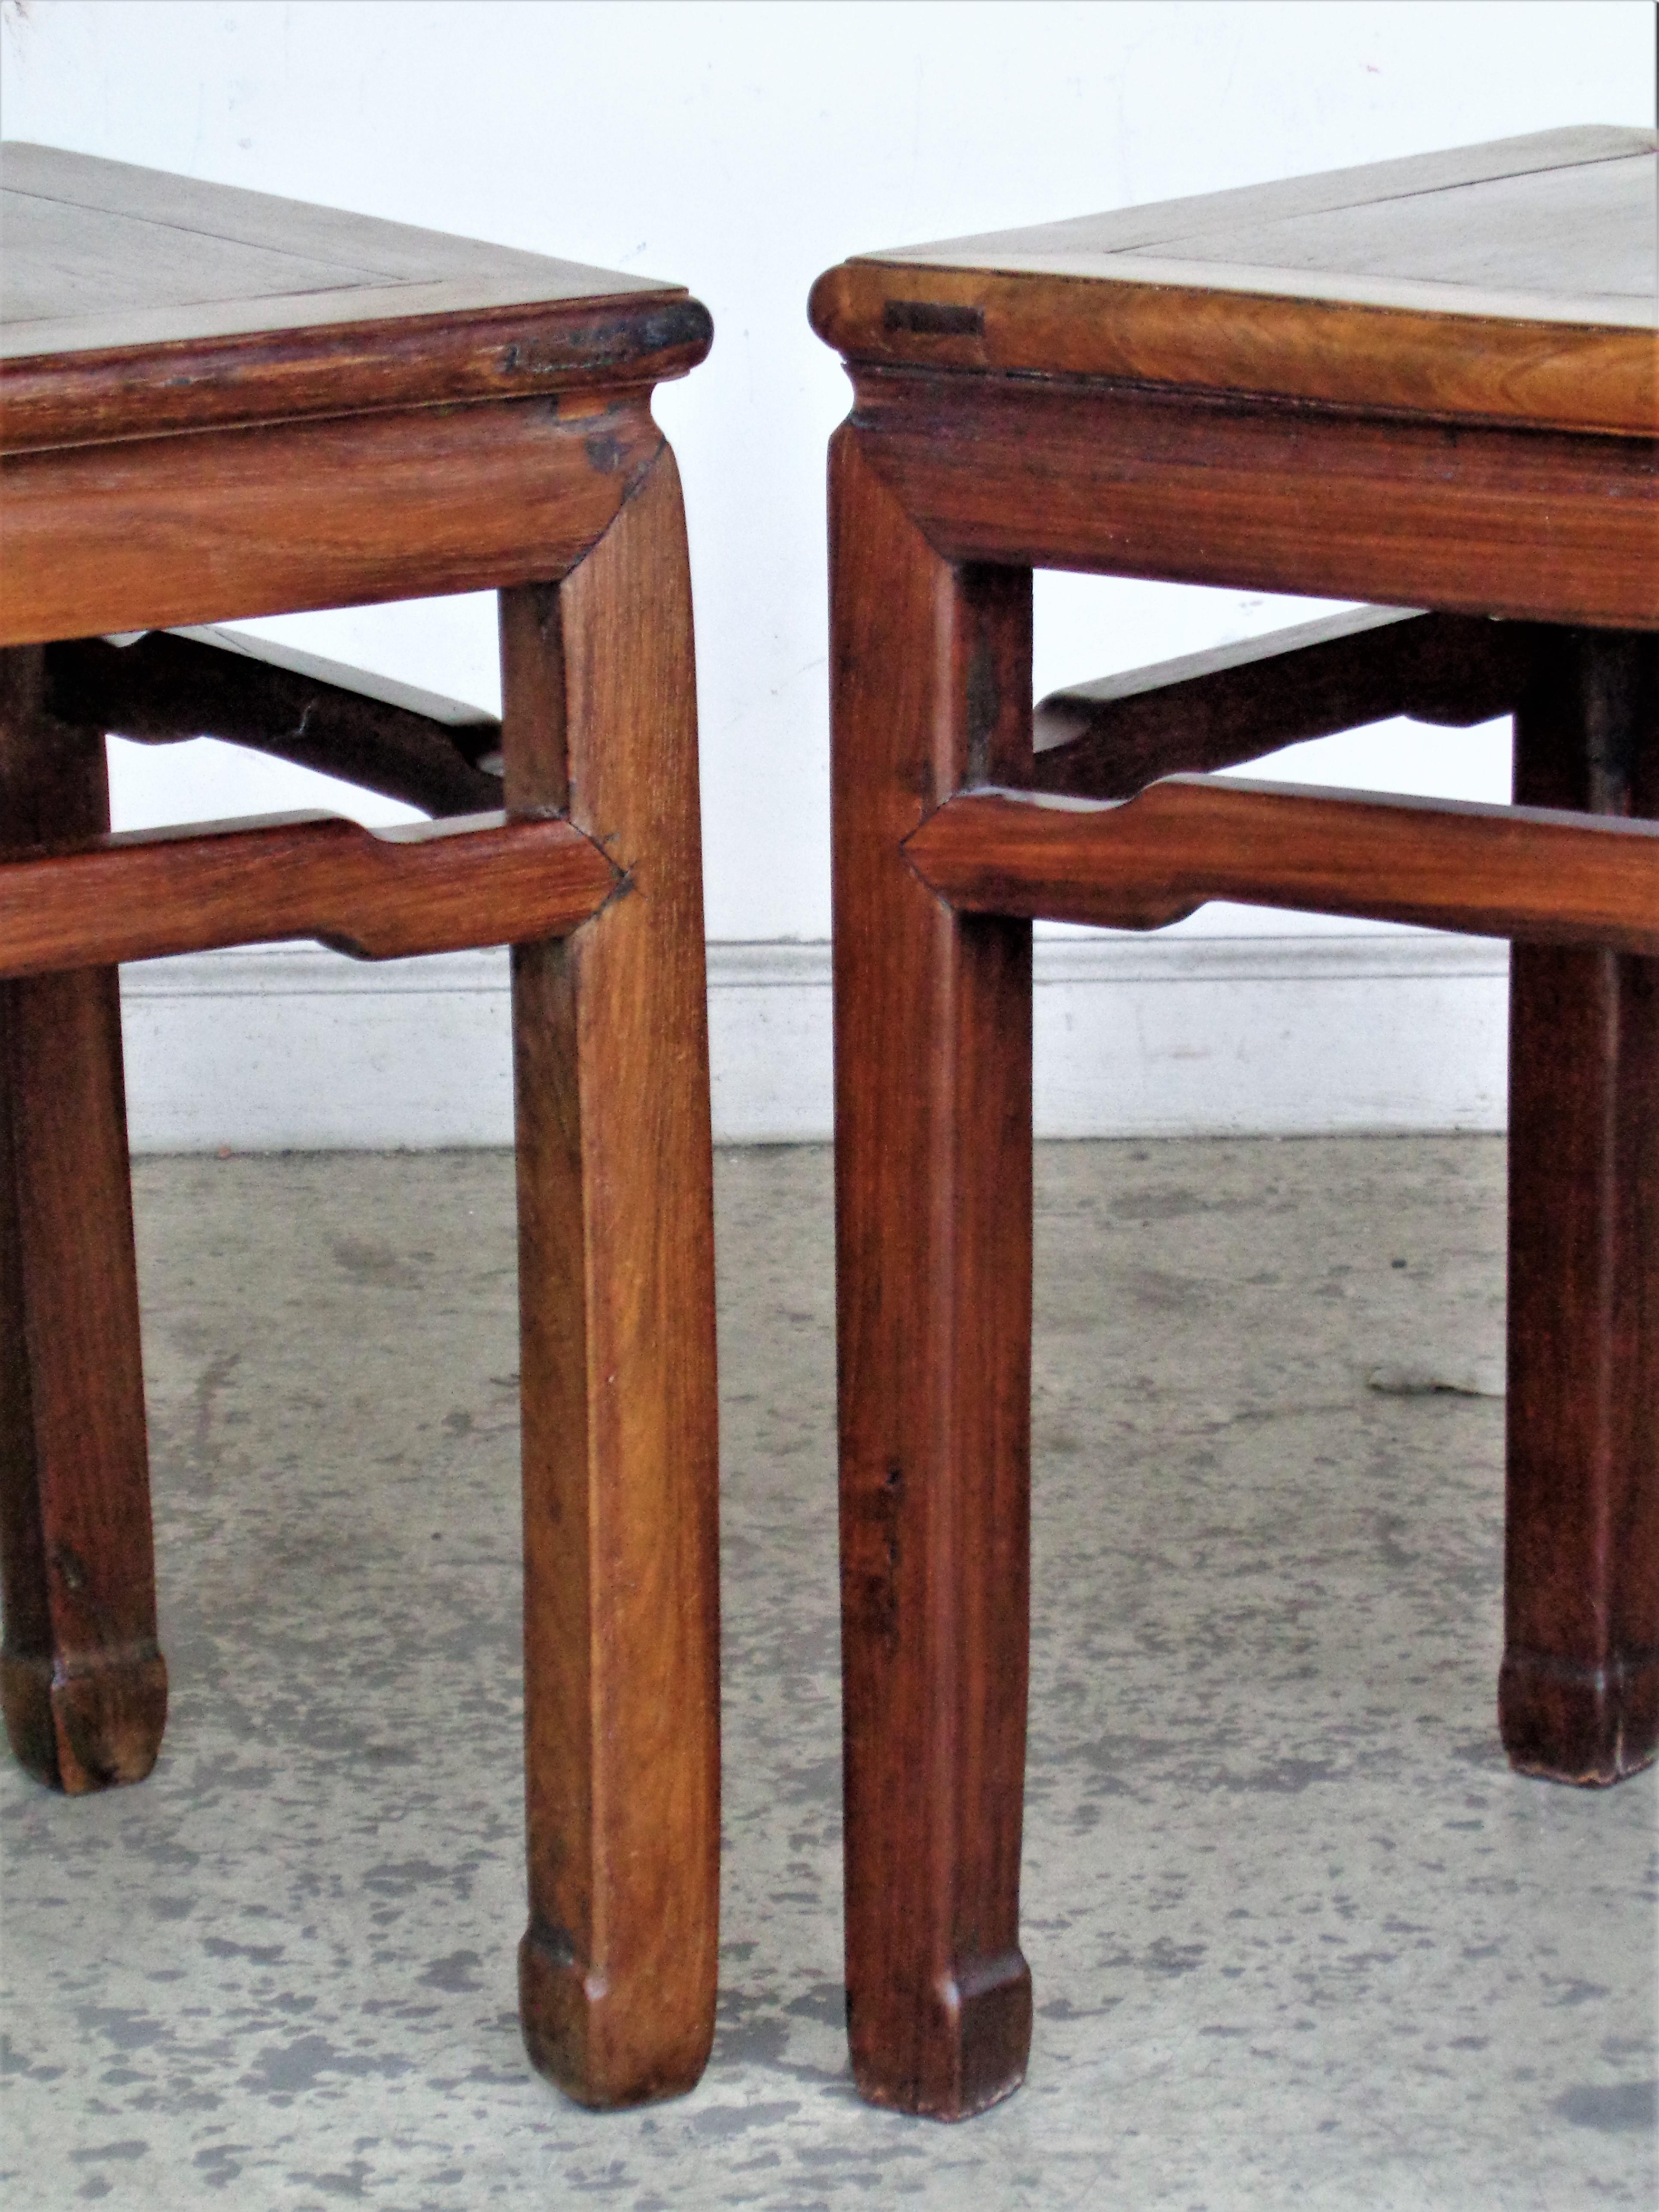 A near pair of 19th century classical Chinese hardwood side tables with hoof foot, early mortise construction ( no nails ) and good original old surface. Table with darker color has old pegged patch at one corner of top - measures 16